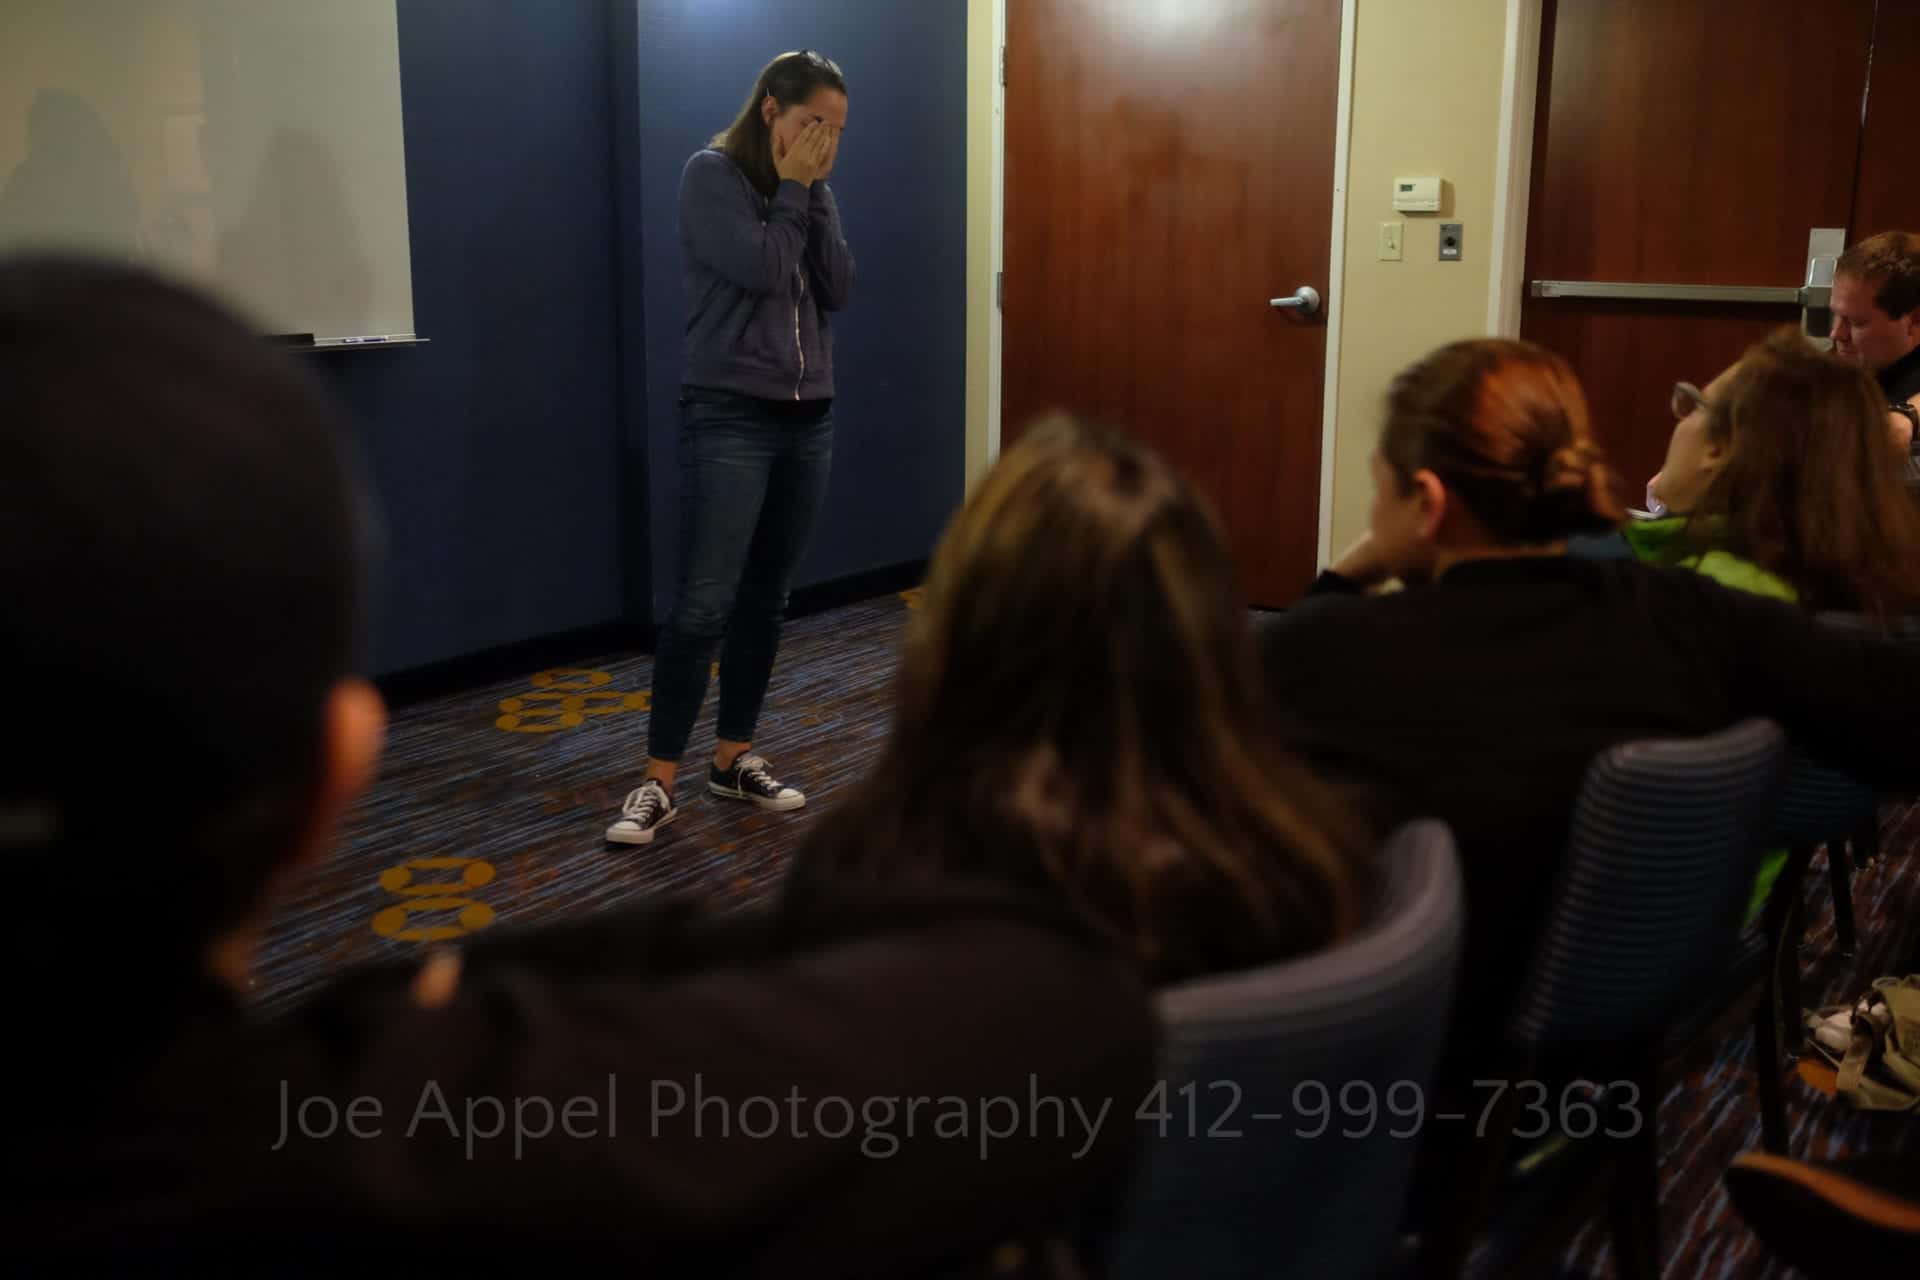 a woman holds her hands to her face as she stands in front of a group of people seated in a conference room.